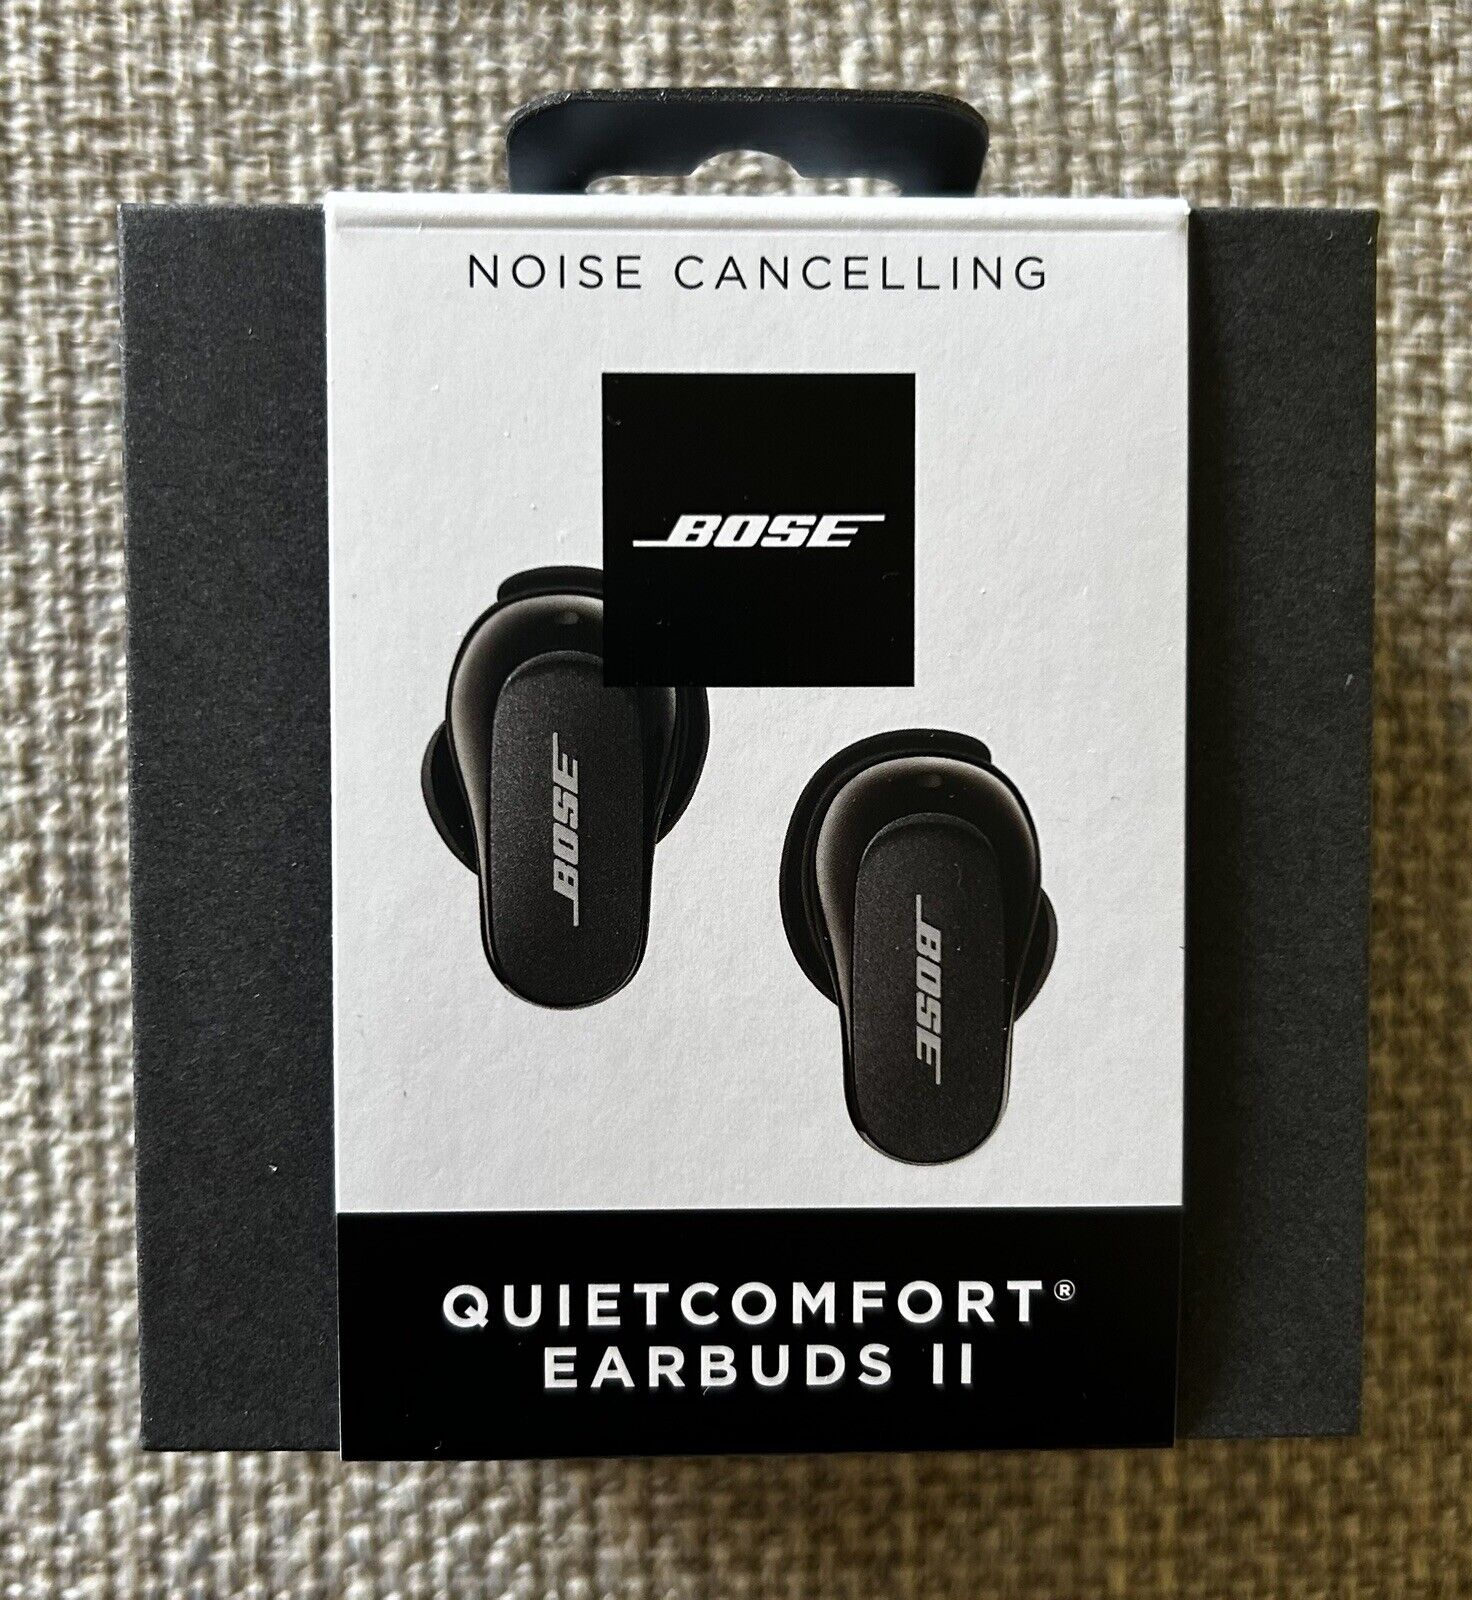 Bose QC Earbuds II: Wireless Noise-Cancelling Headphones